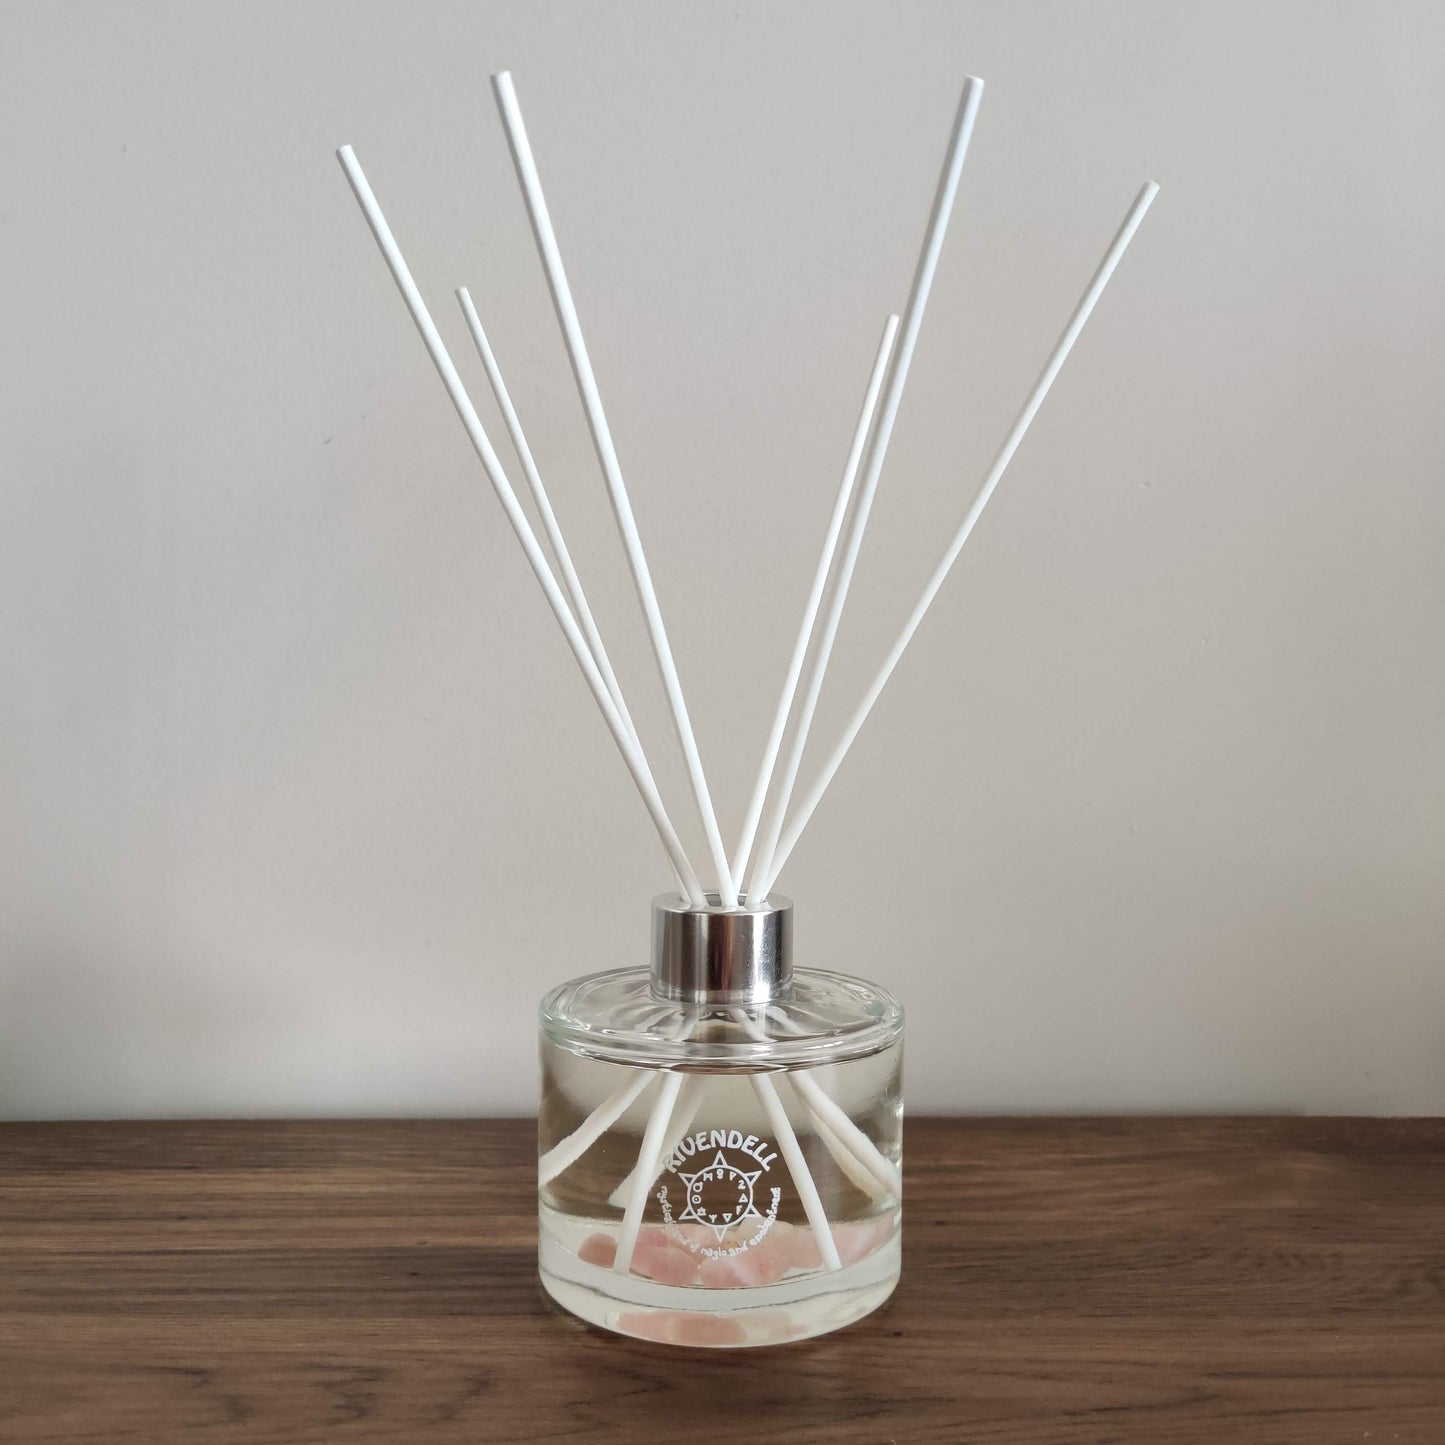 Rivendell Aroma: Rose Quartz x Lavender and Jasmine Crystal-Infused Reed Diffuser - Rivendell Shop